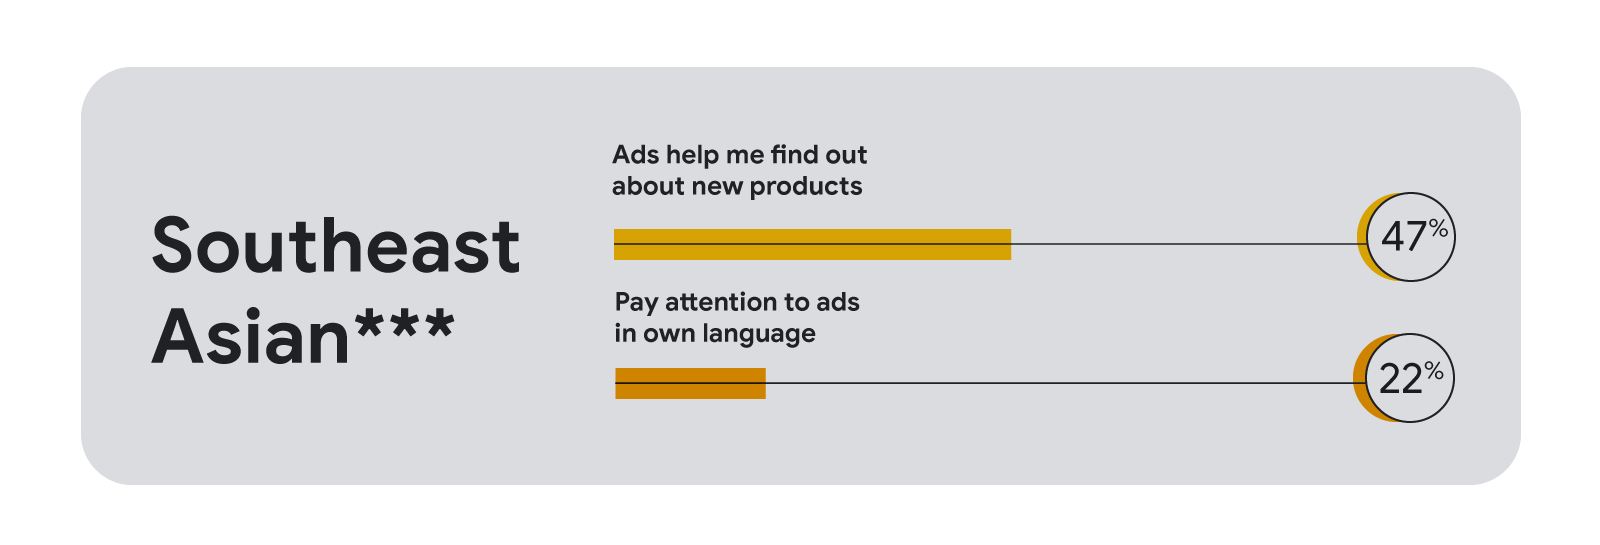 A horizontal bar chart showing 47% of Southeast Asian Canadians*** use ads to find out about new products, and 22% pay attention to ads in their own language.